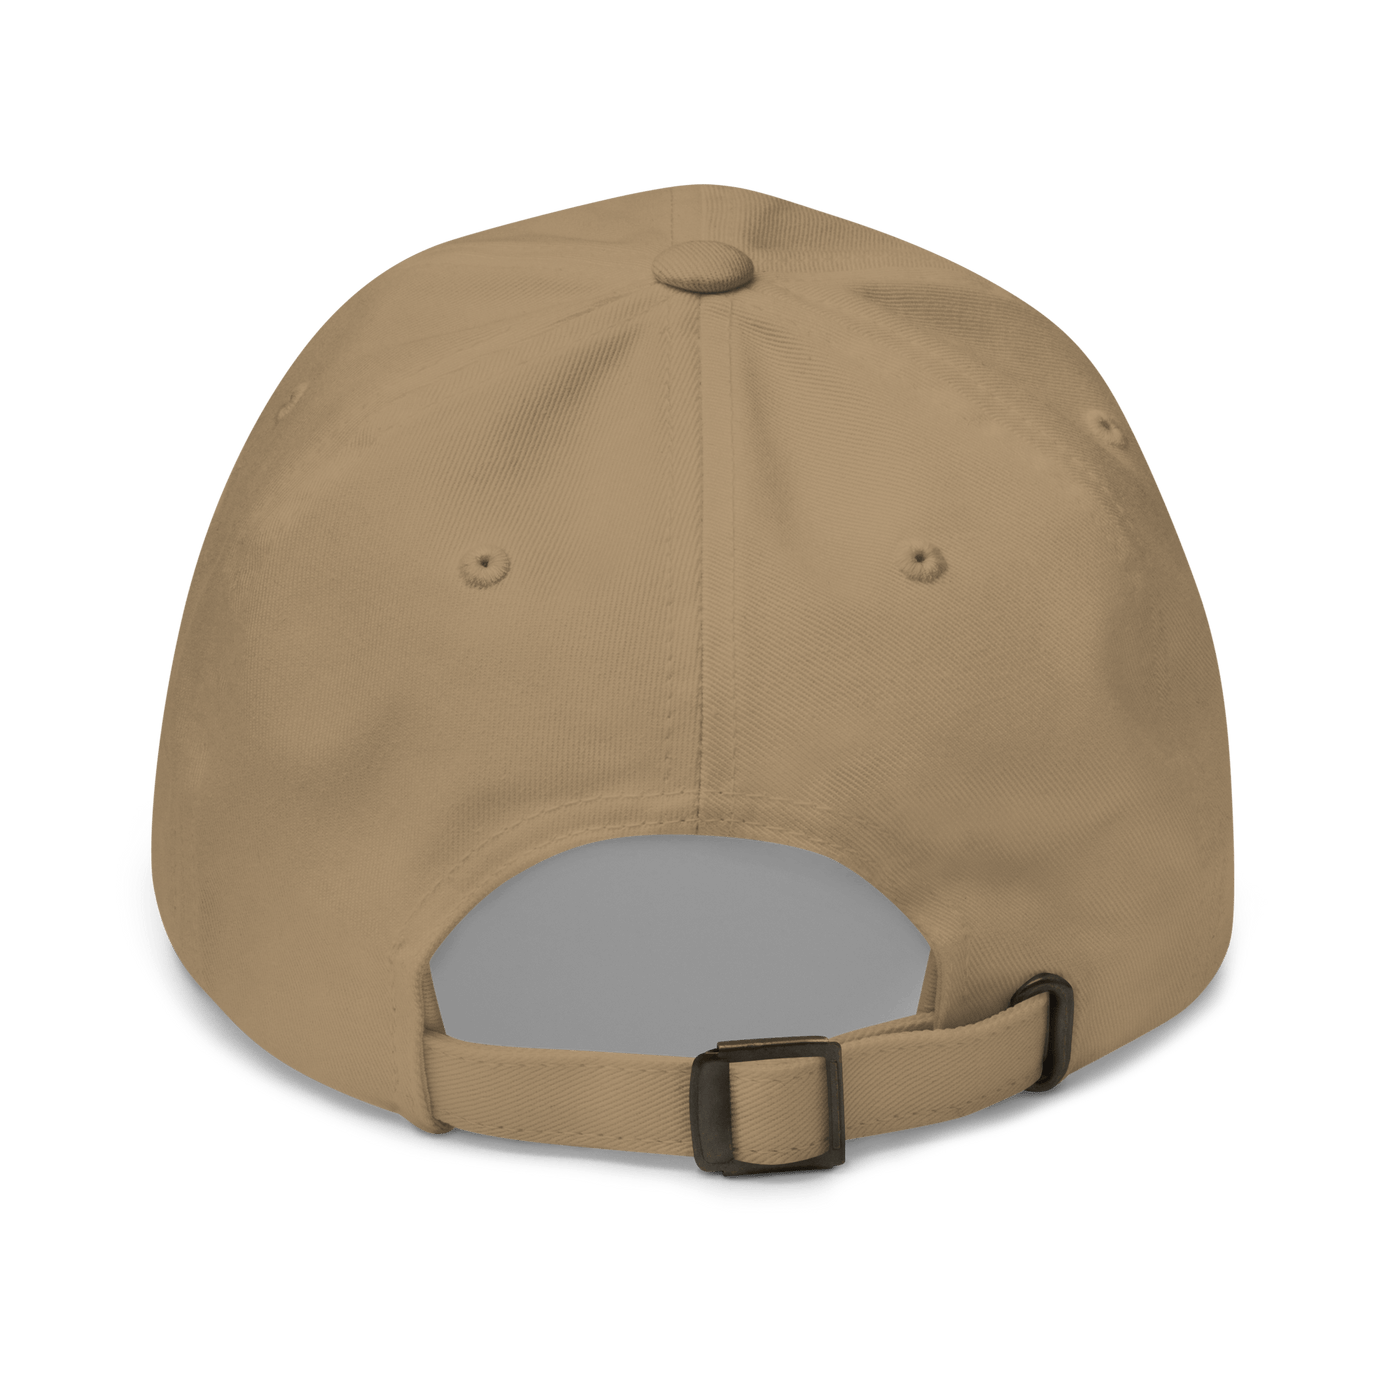 FAKE Dad hat - Khaki - - Just Another Cap Store